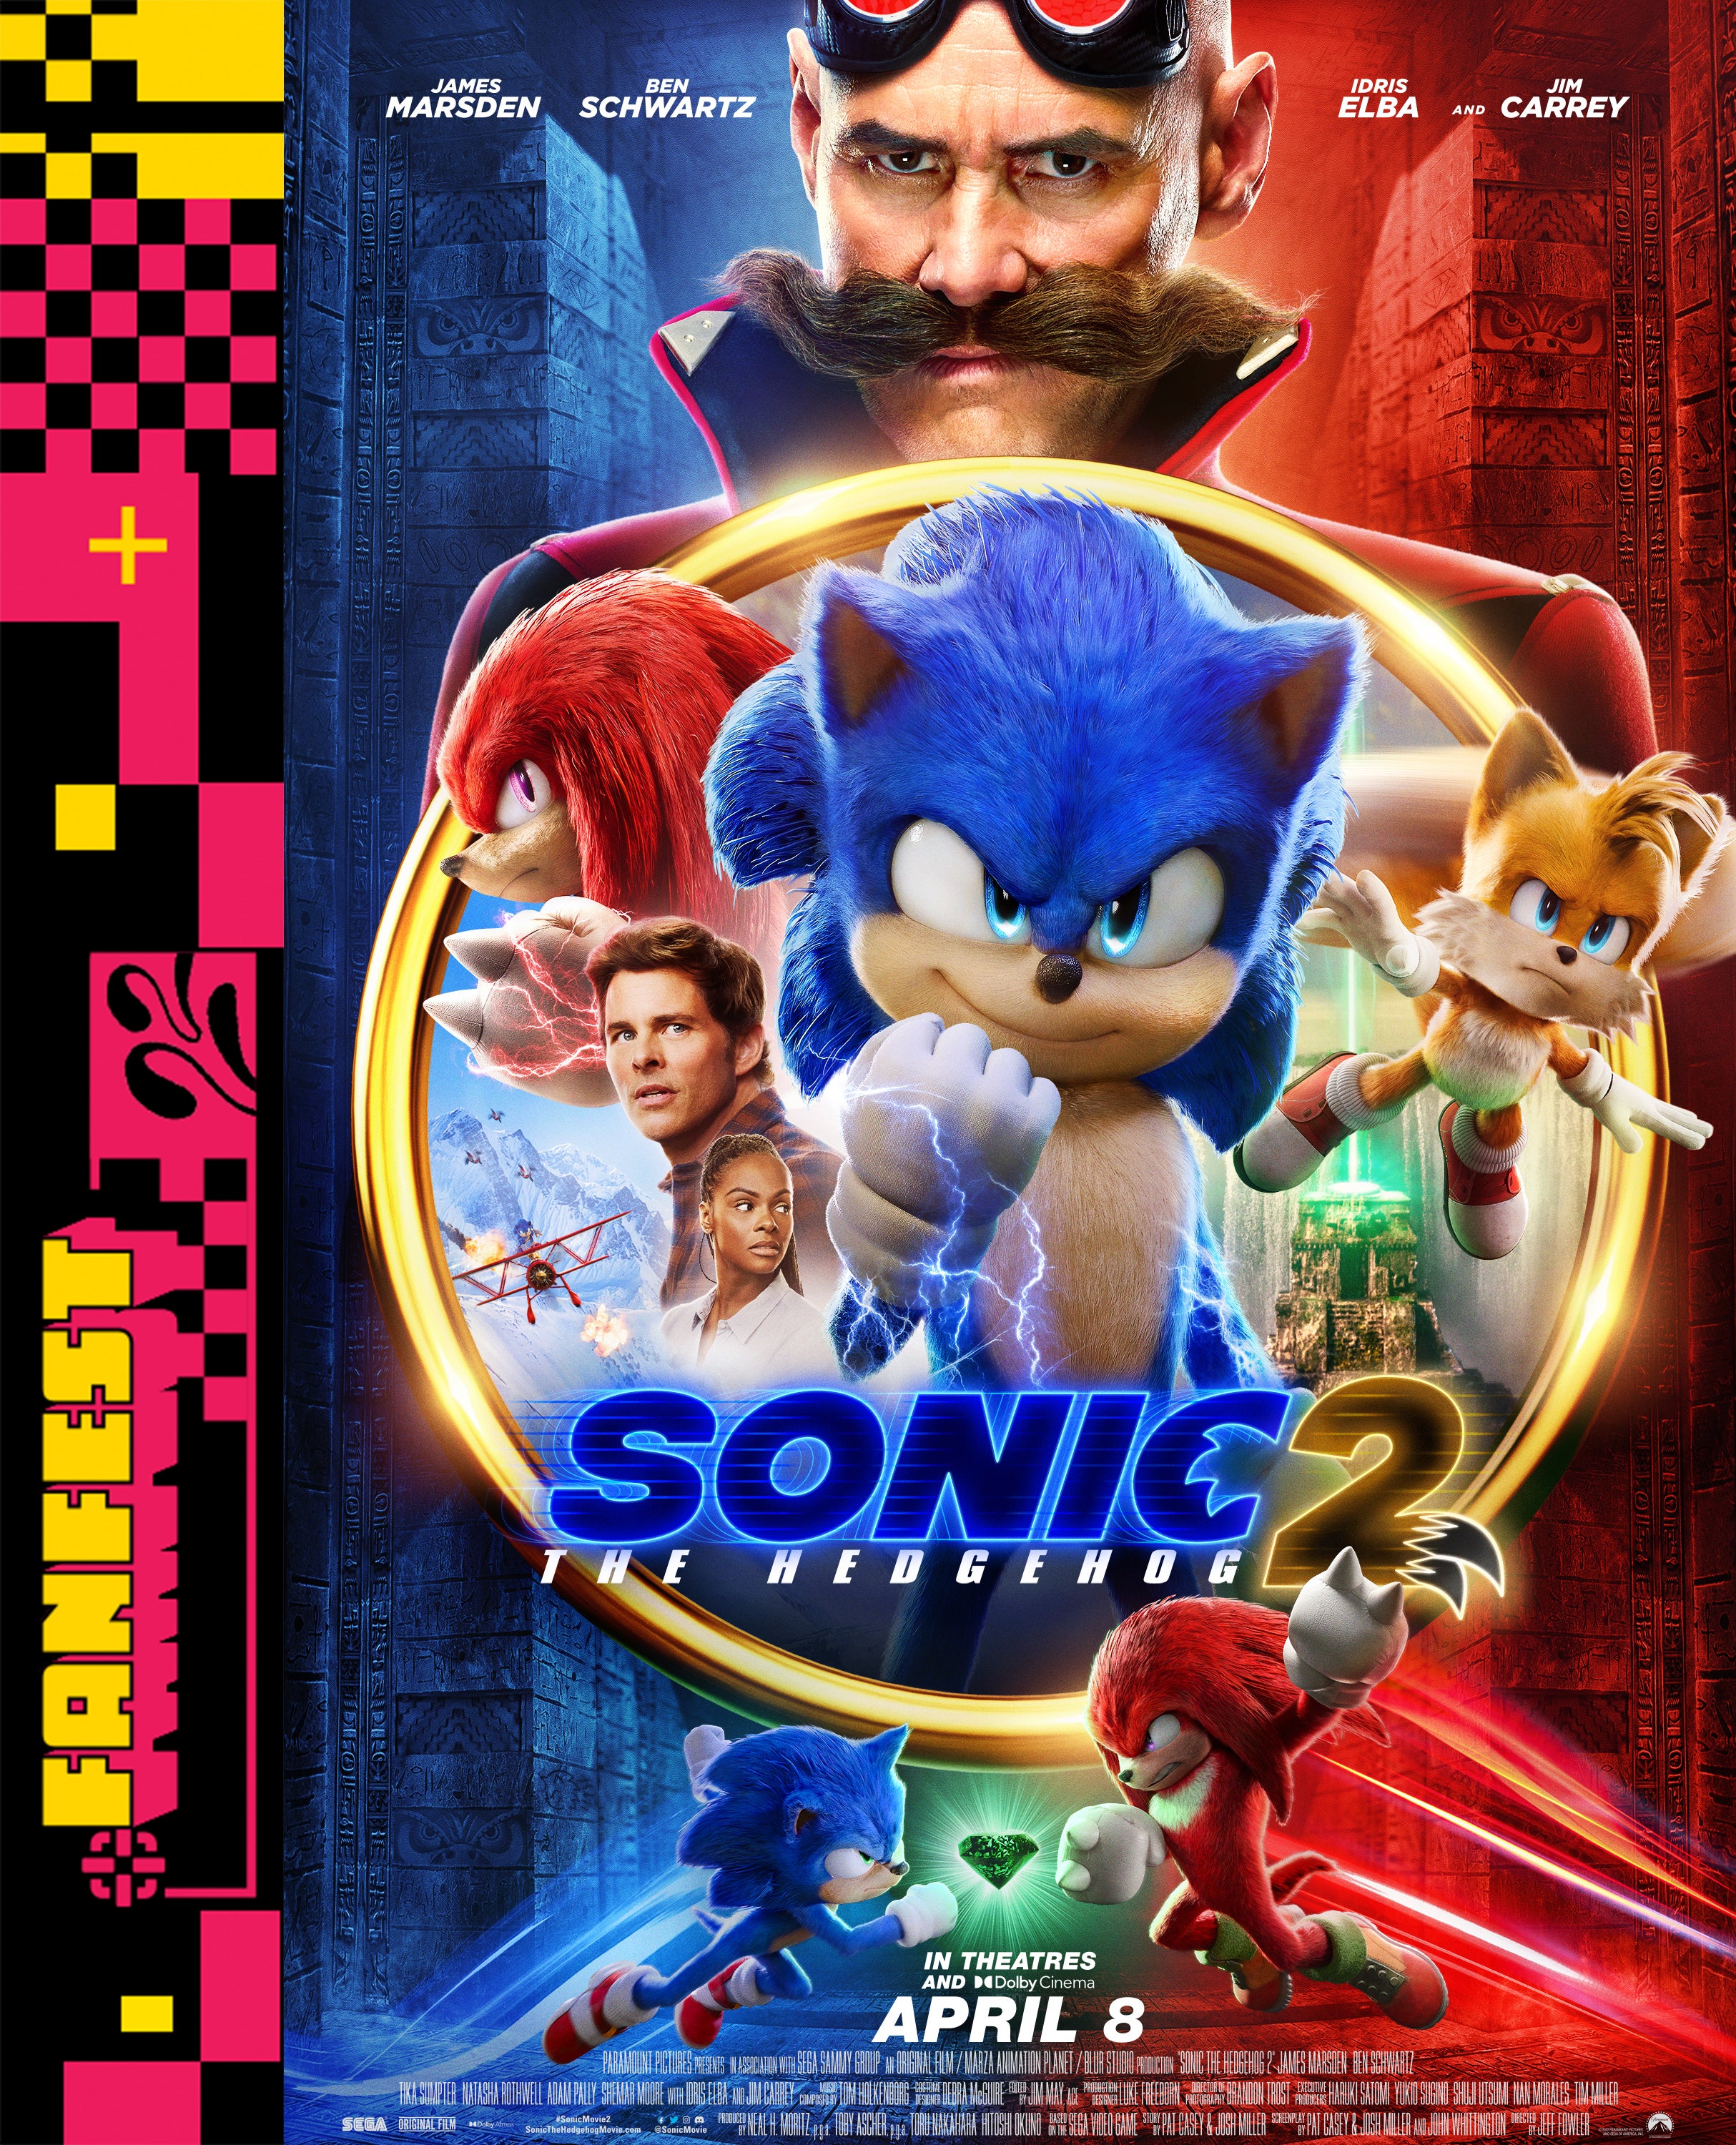 New Sonic the Hedgehog 2 Movie Poster Is a Treat For Longtime Fans Of the Games